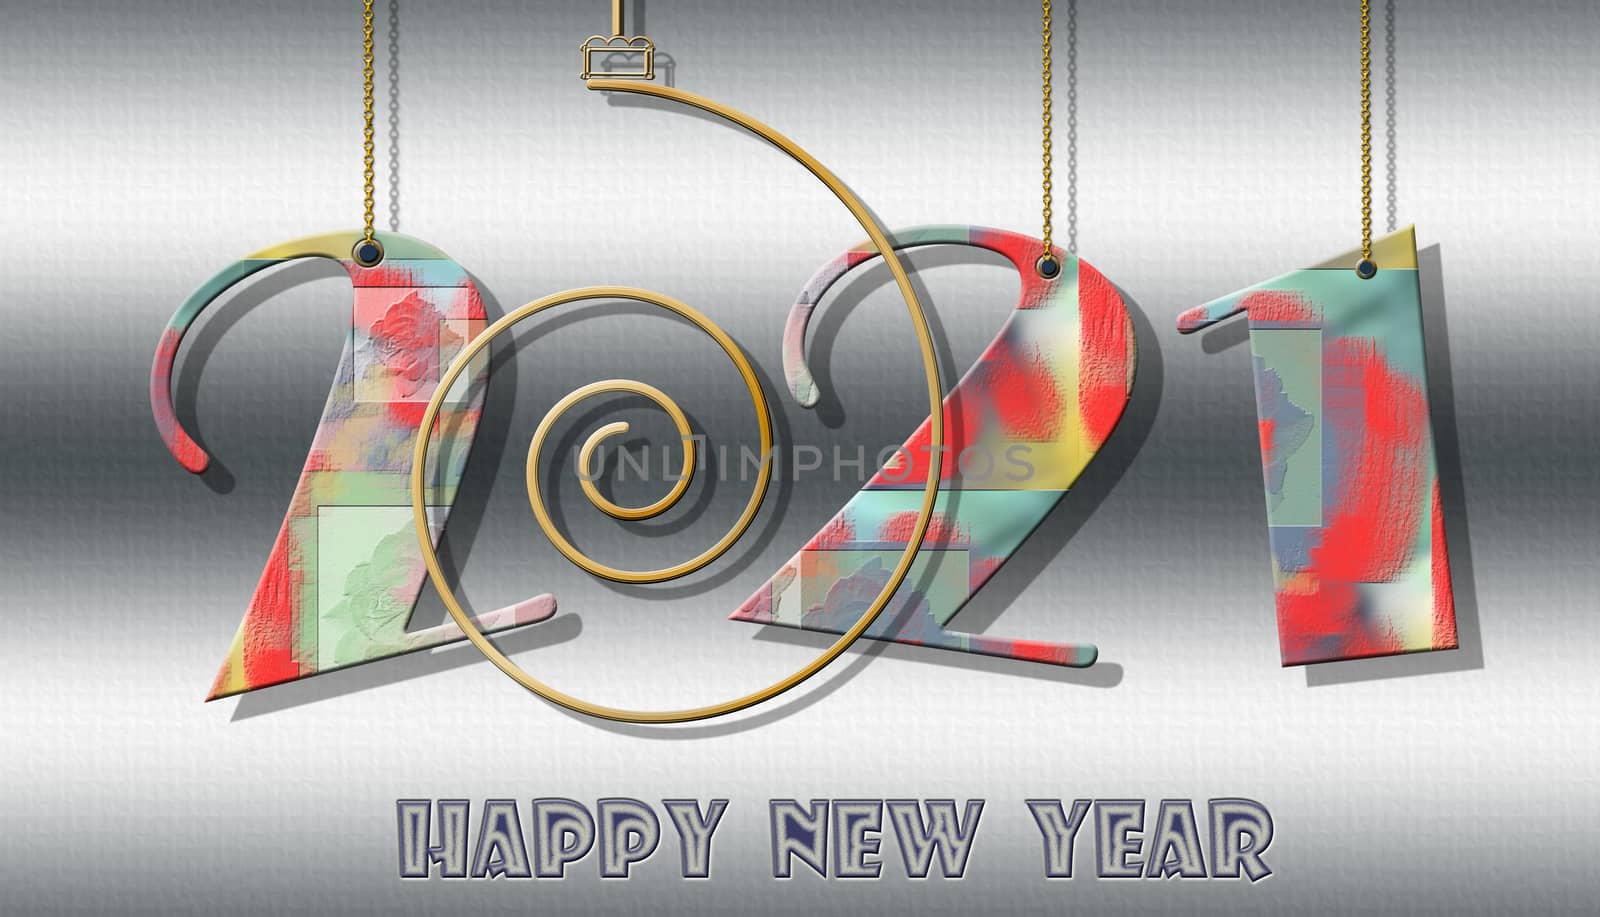 Happy 2021 new year colorful banner. Hanging numbers 2021, text Happy New Year on metallic grey shiny background. 3D illustration